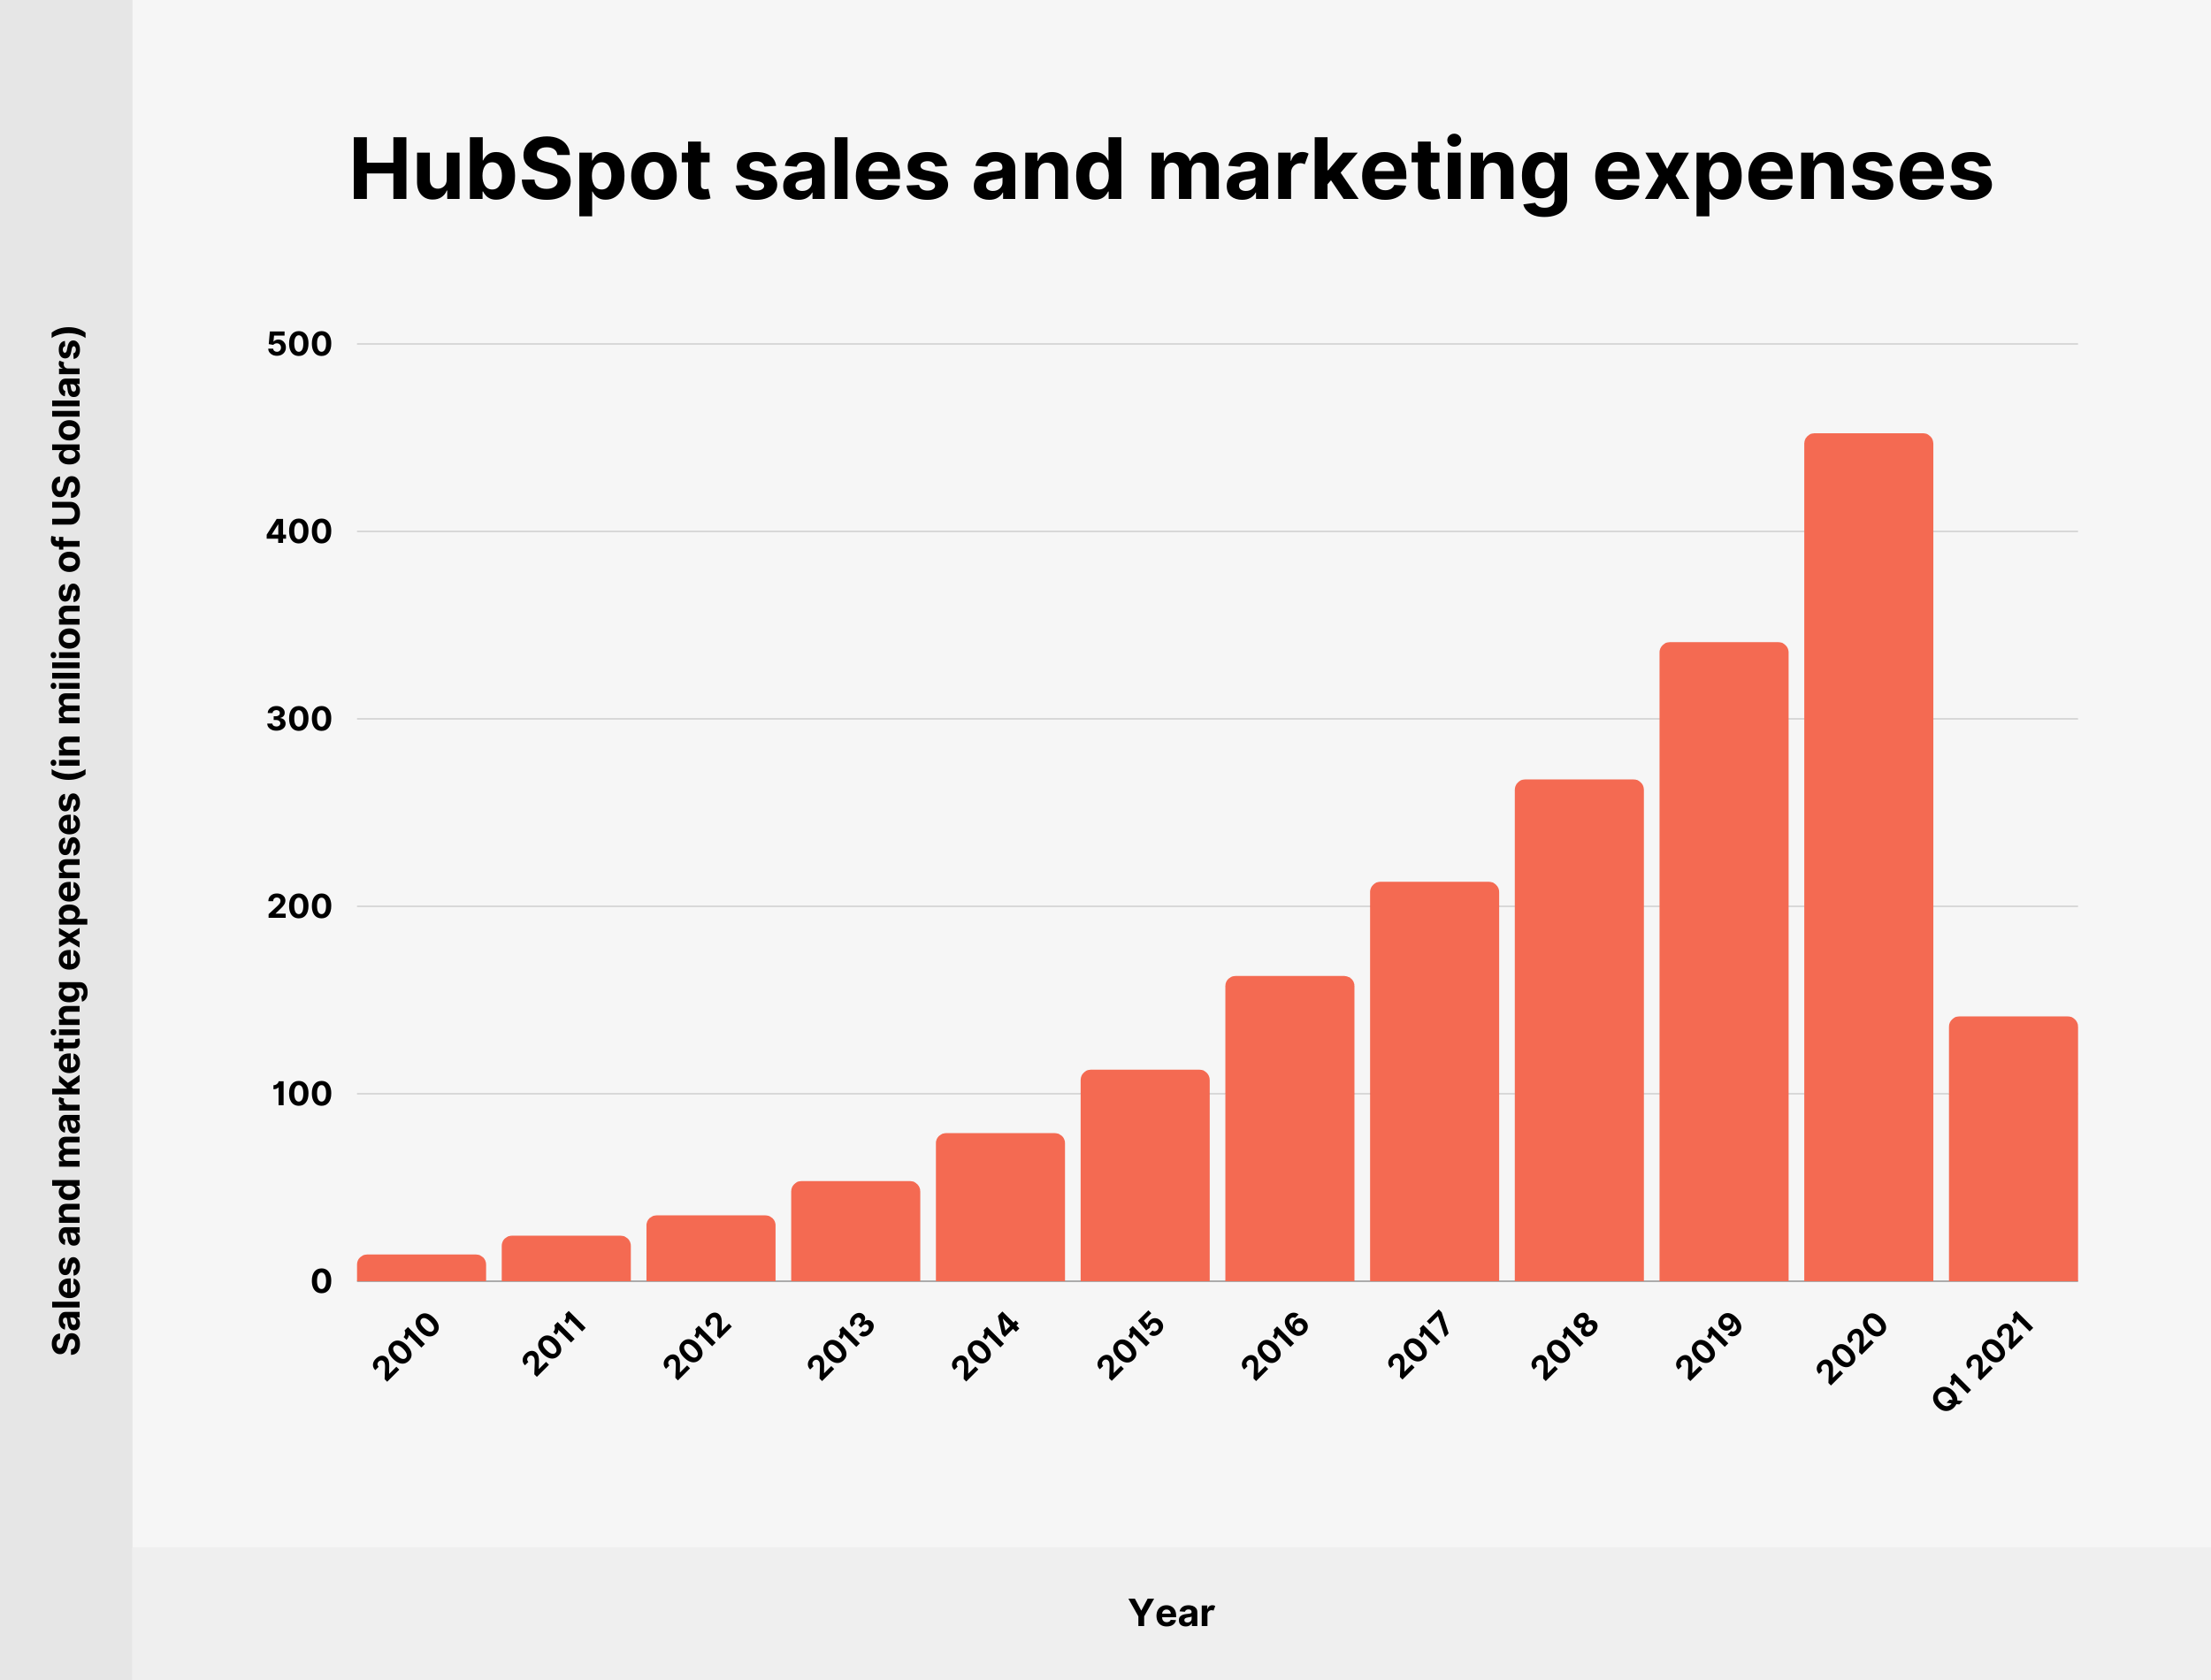 HubSpot sales and marketing expenses